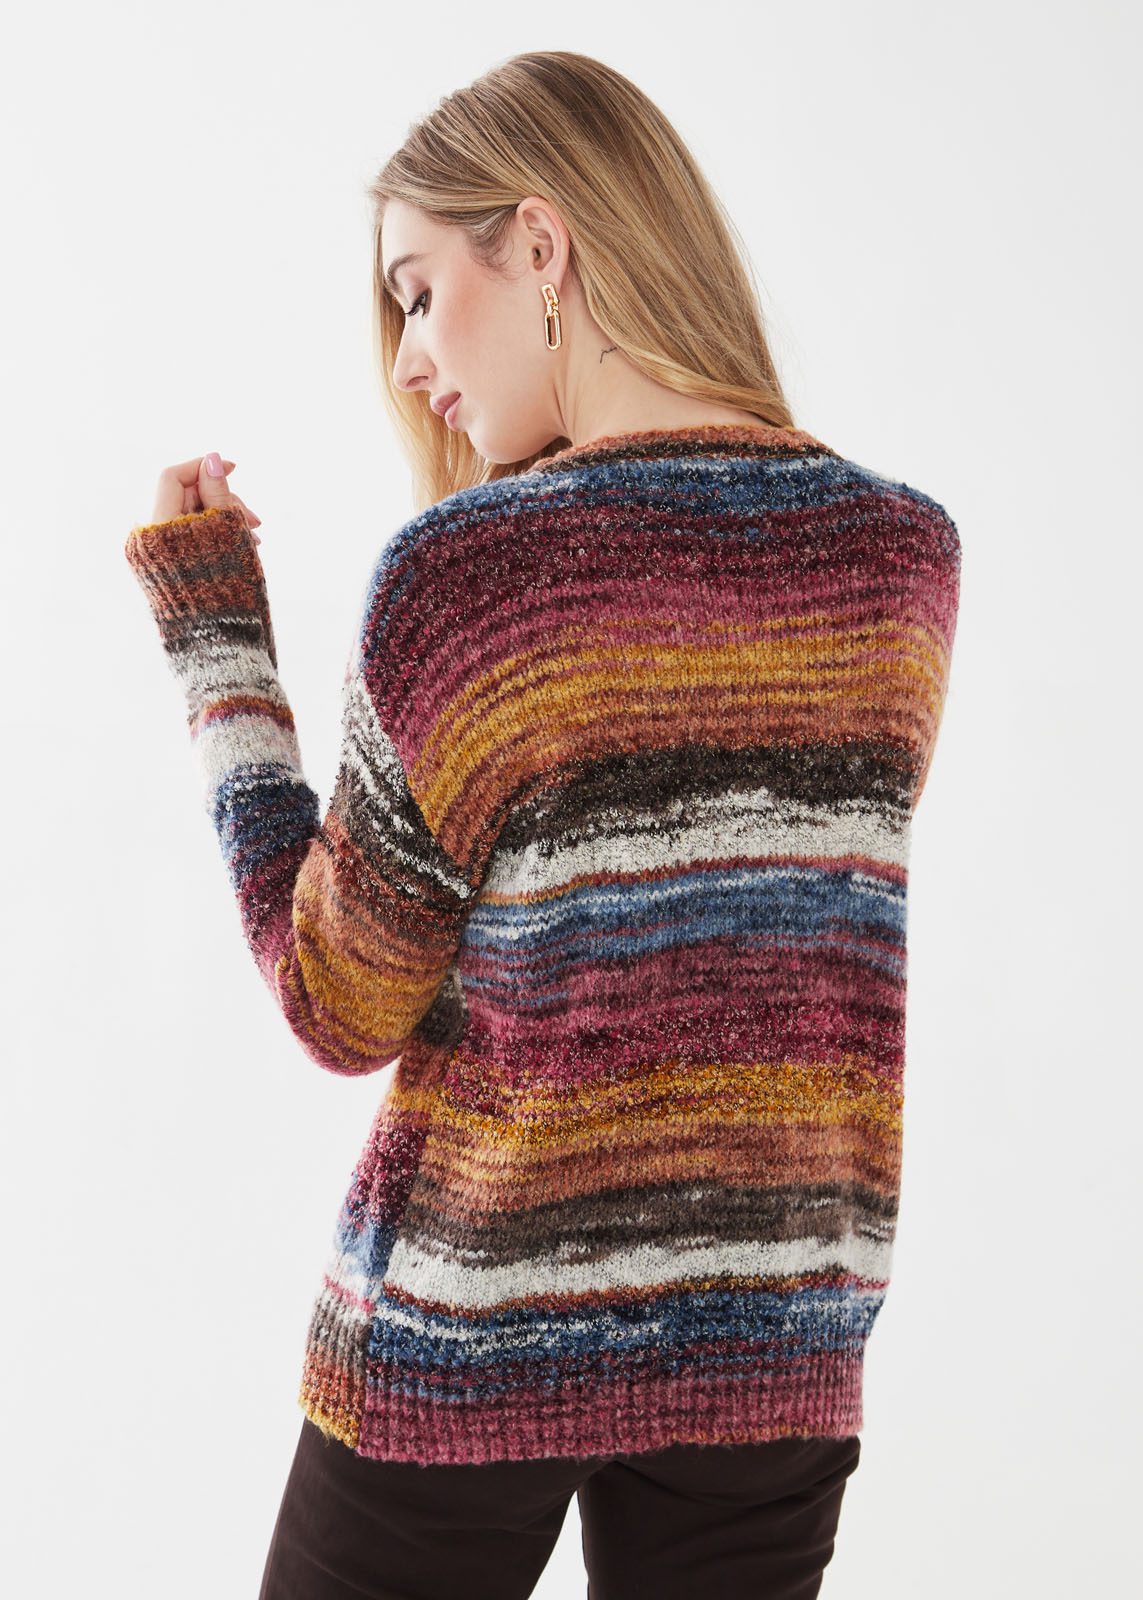 Boatneck Space Dye Sweater (Autumn Spa)